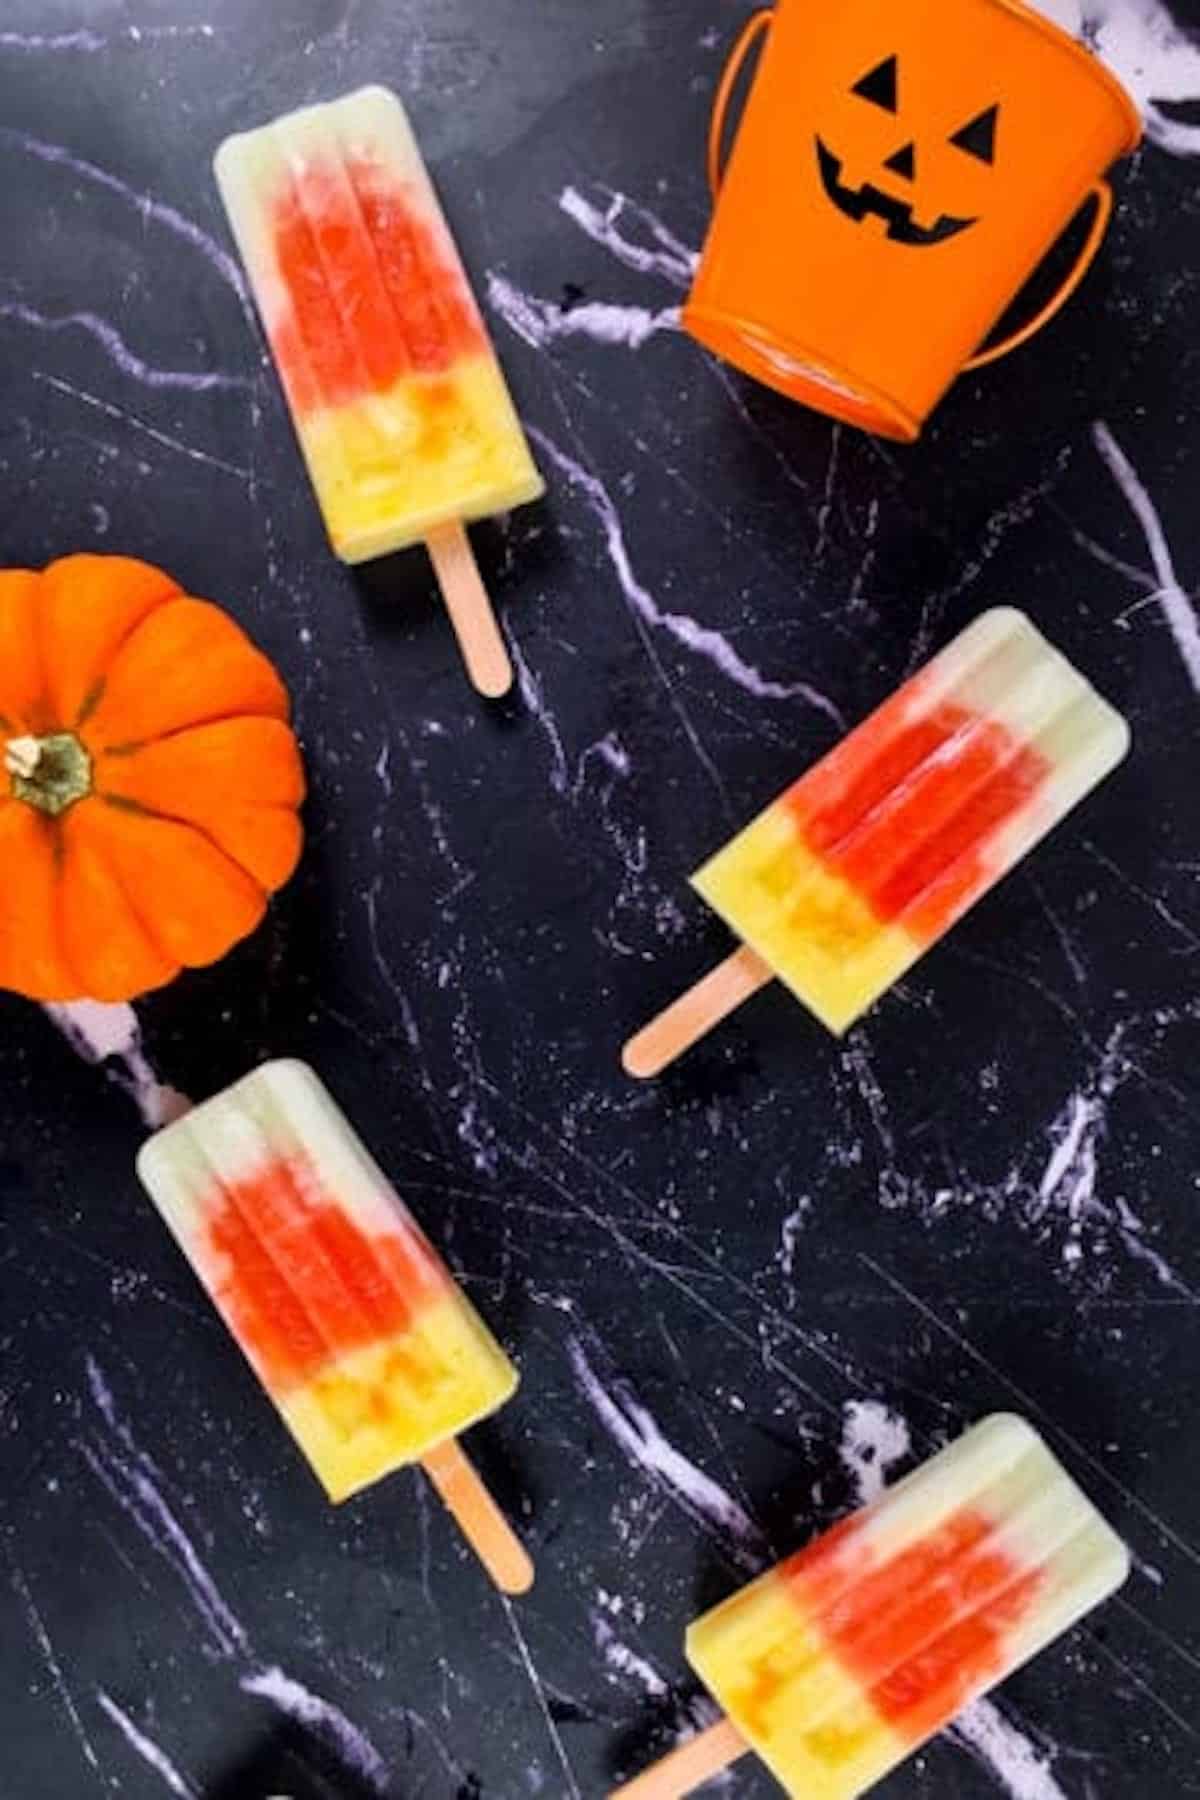 4 colourful fruit popsicles on a black surface.